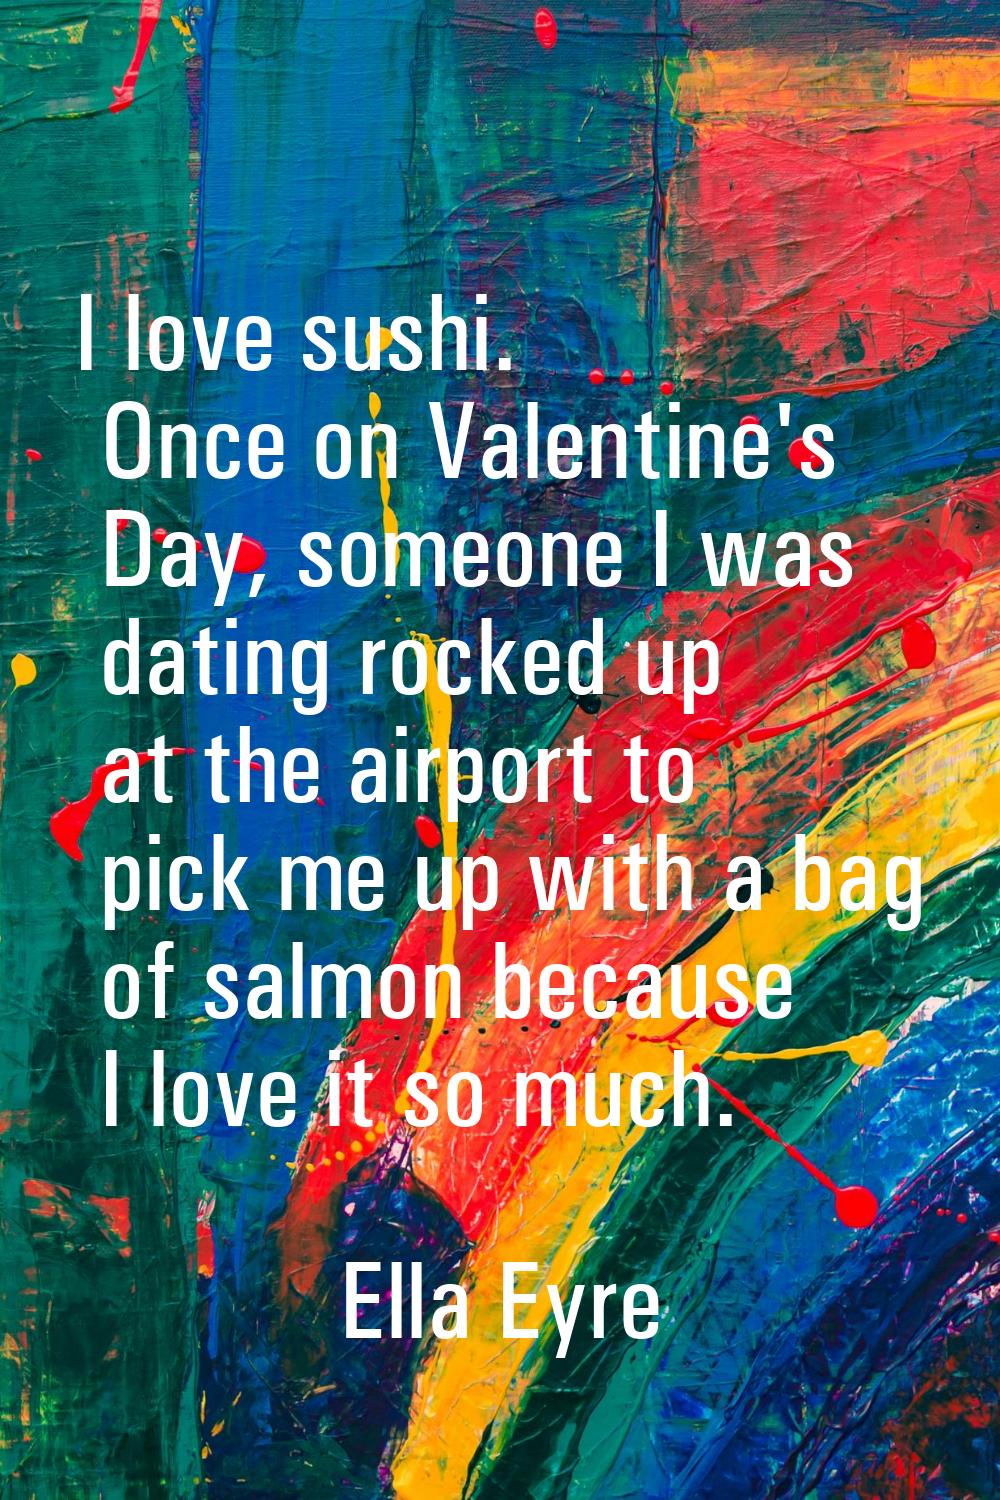 I love sushi. Once on Valentine's Day, someone I was dating rocked up at the airport to pick me up 